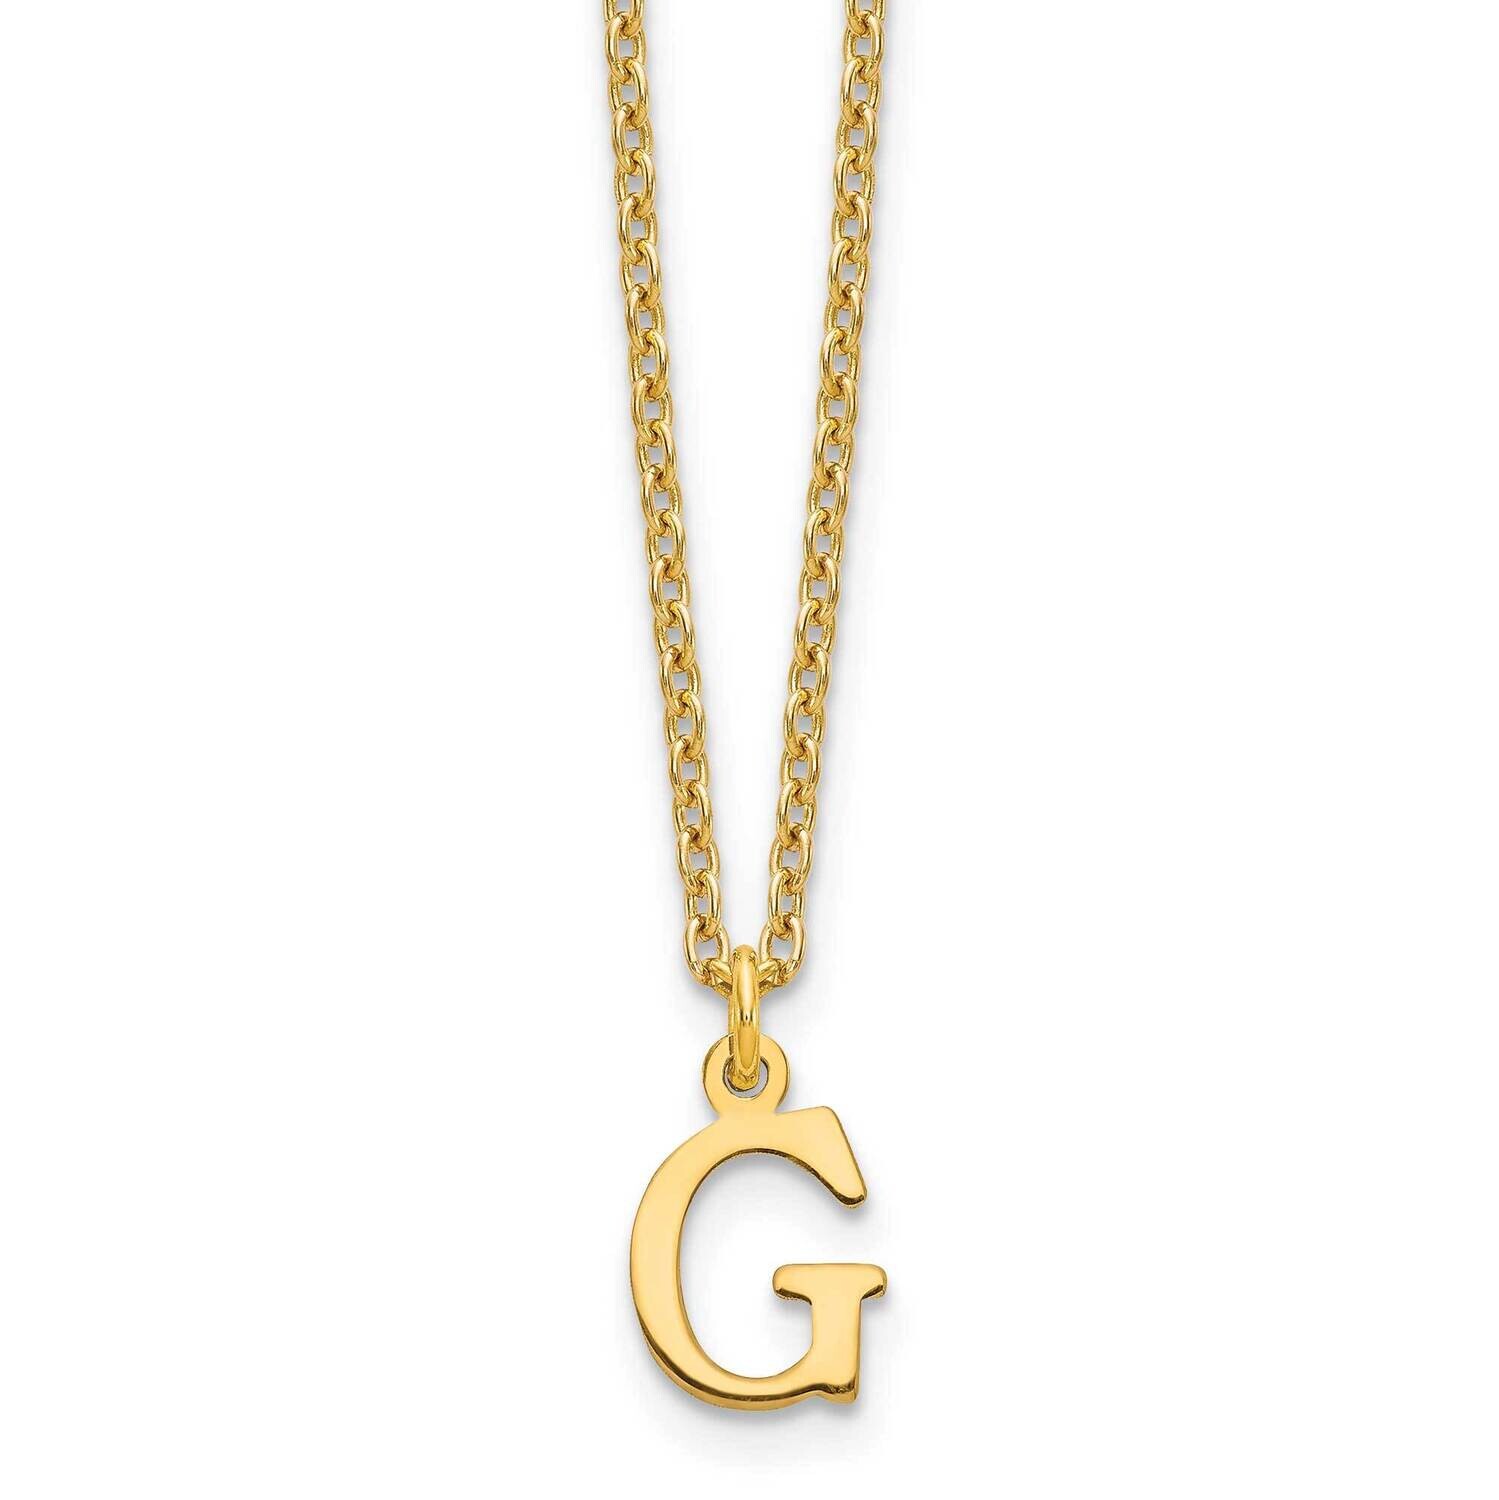 Gold-Plated Cutout Letter G Initial Necklace Sterling Silver XNA727GP/G